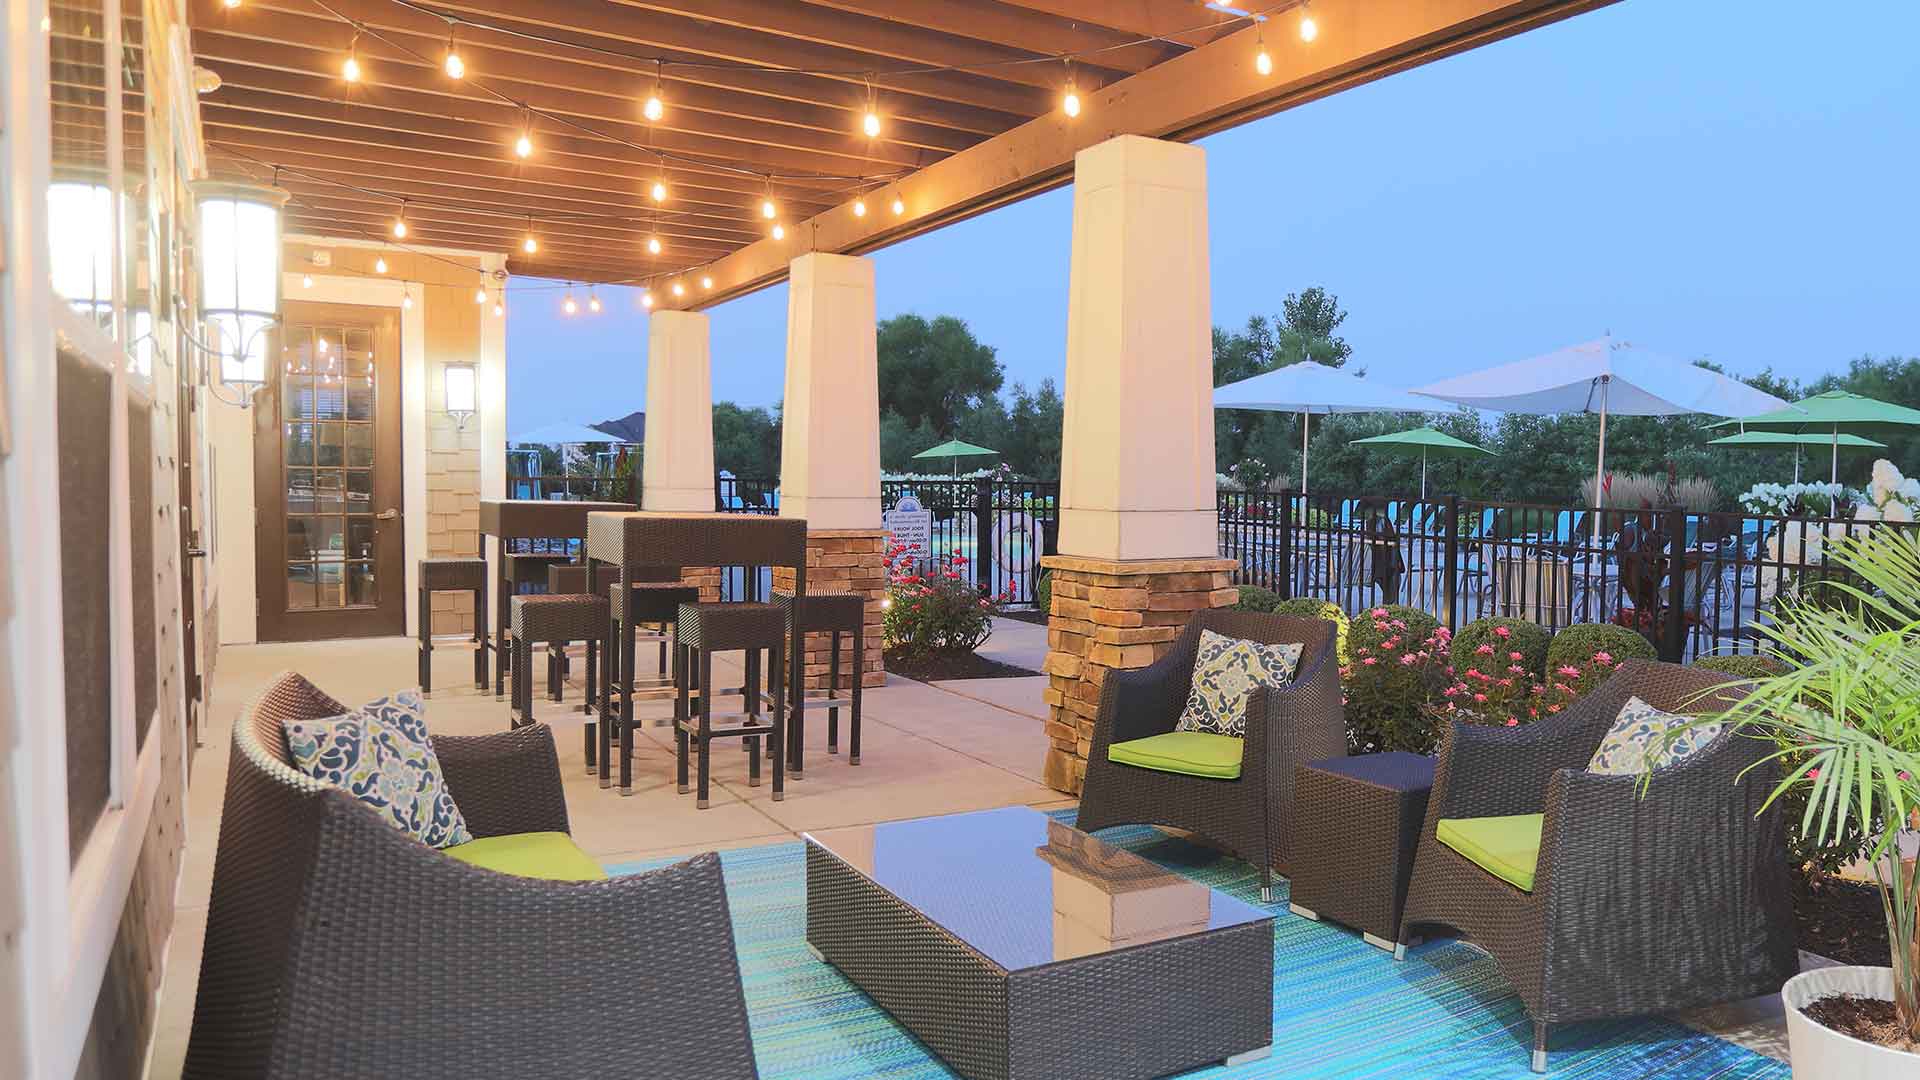 Spacious, furnished poolside outdoor patio space at Palmera.